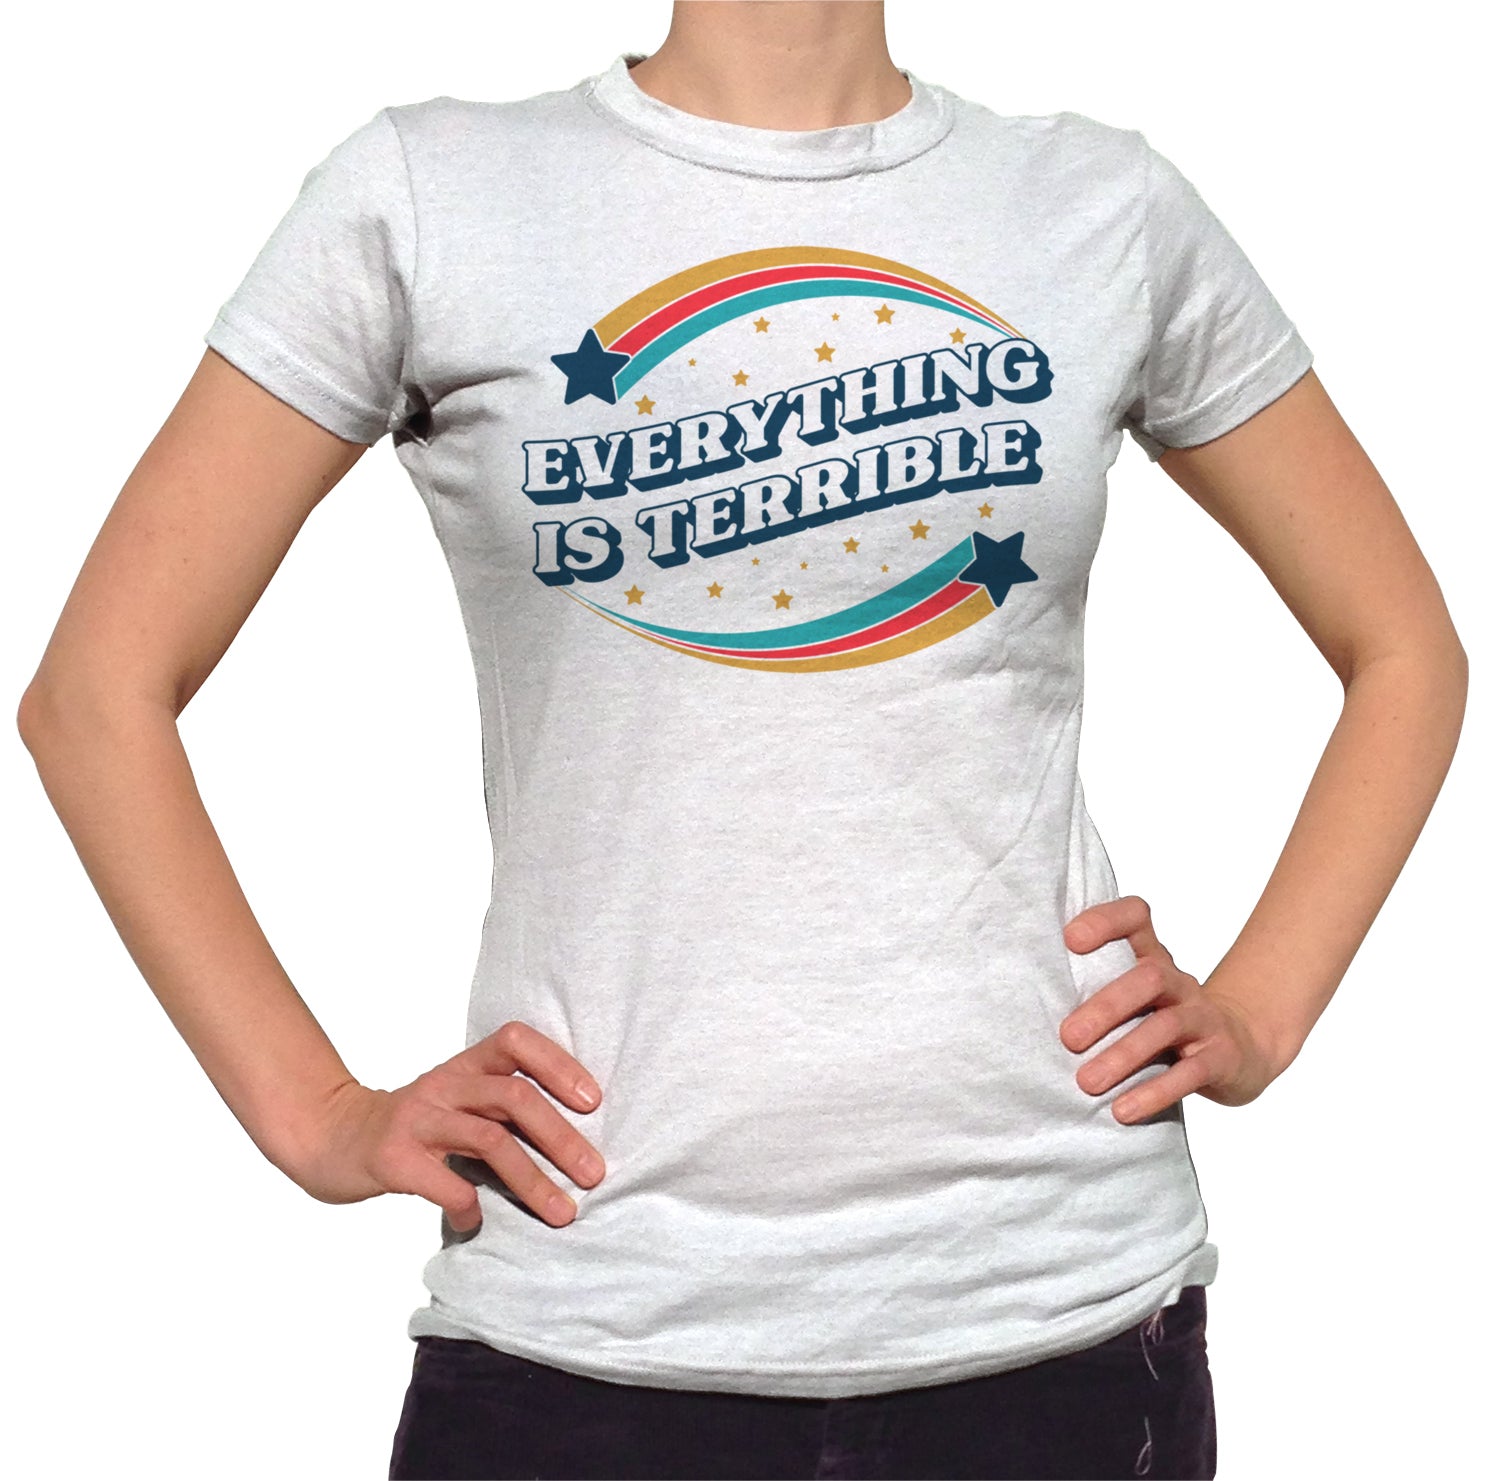 Women's Everything is Terrible T-Shirt